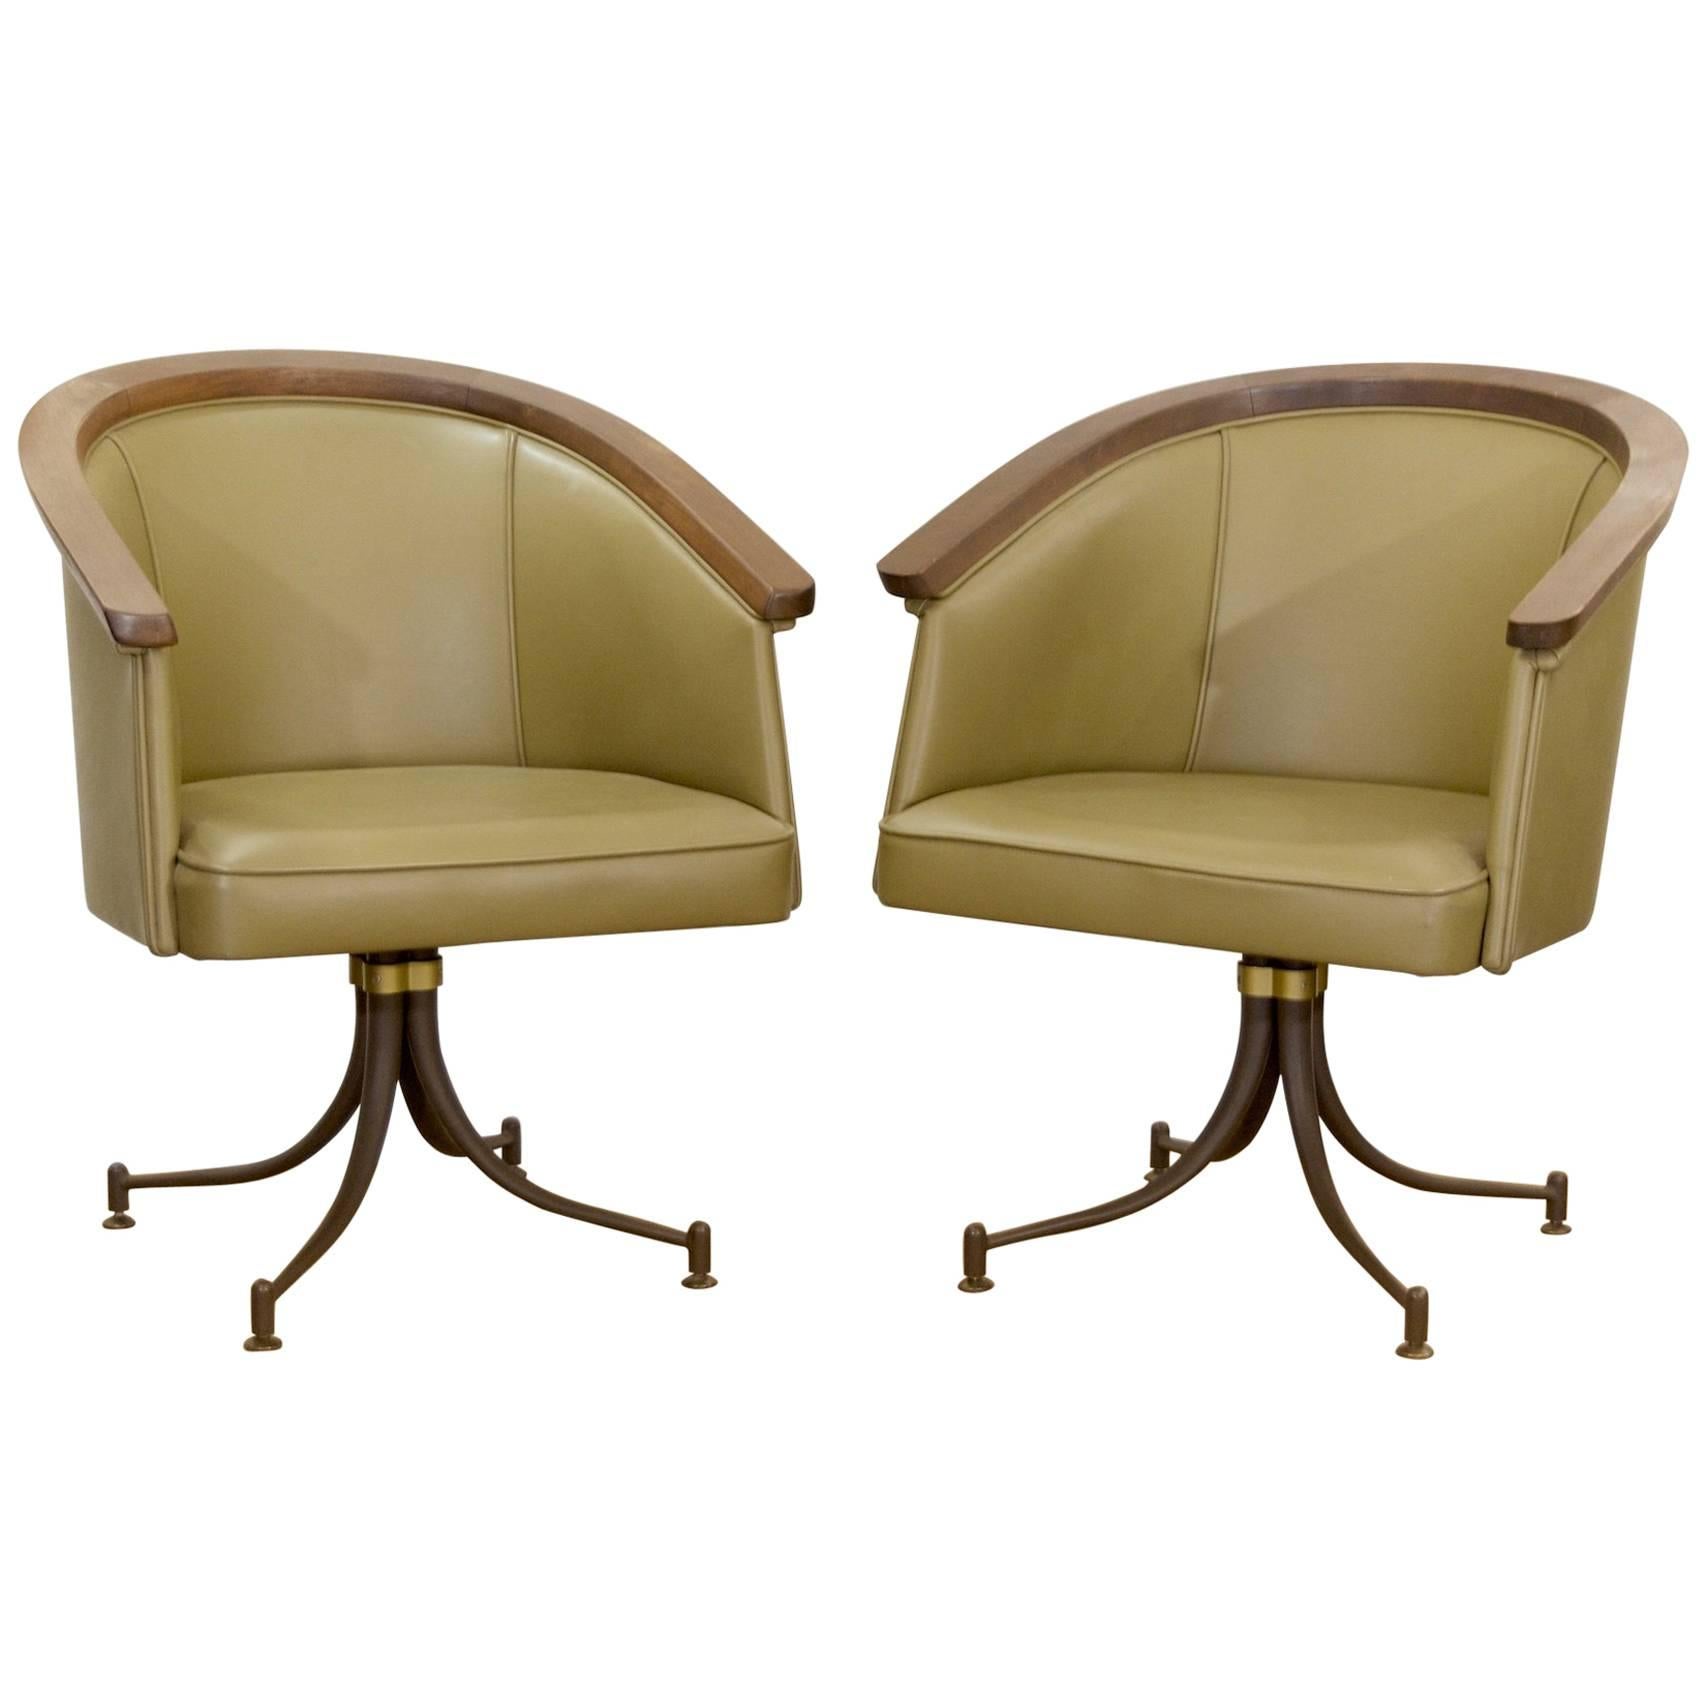 Pair of Olive Tone Swivel Armchairs by Troy Sunshade Company